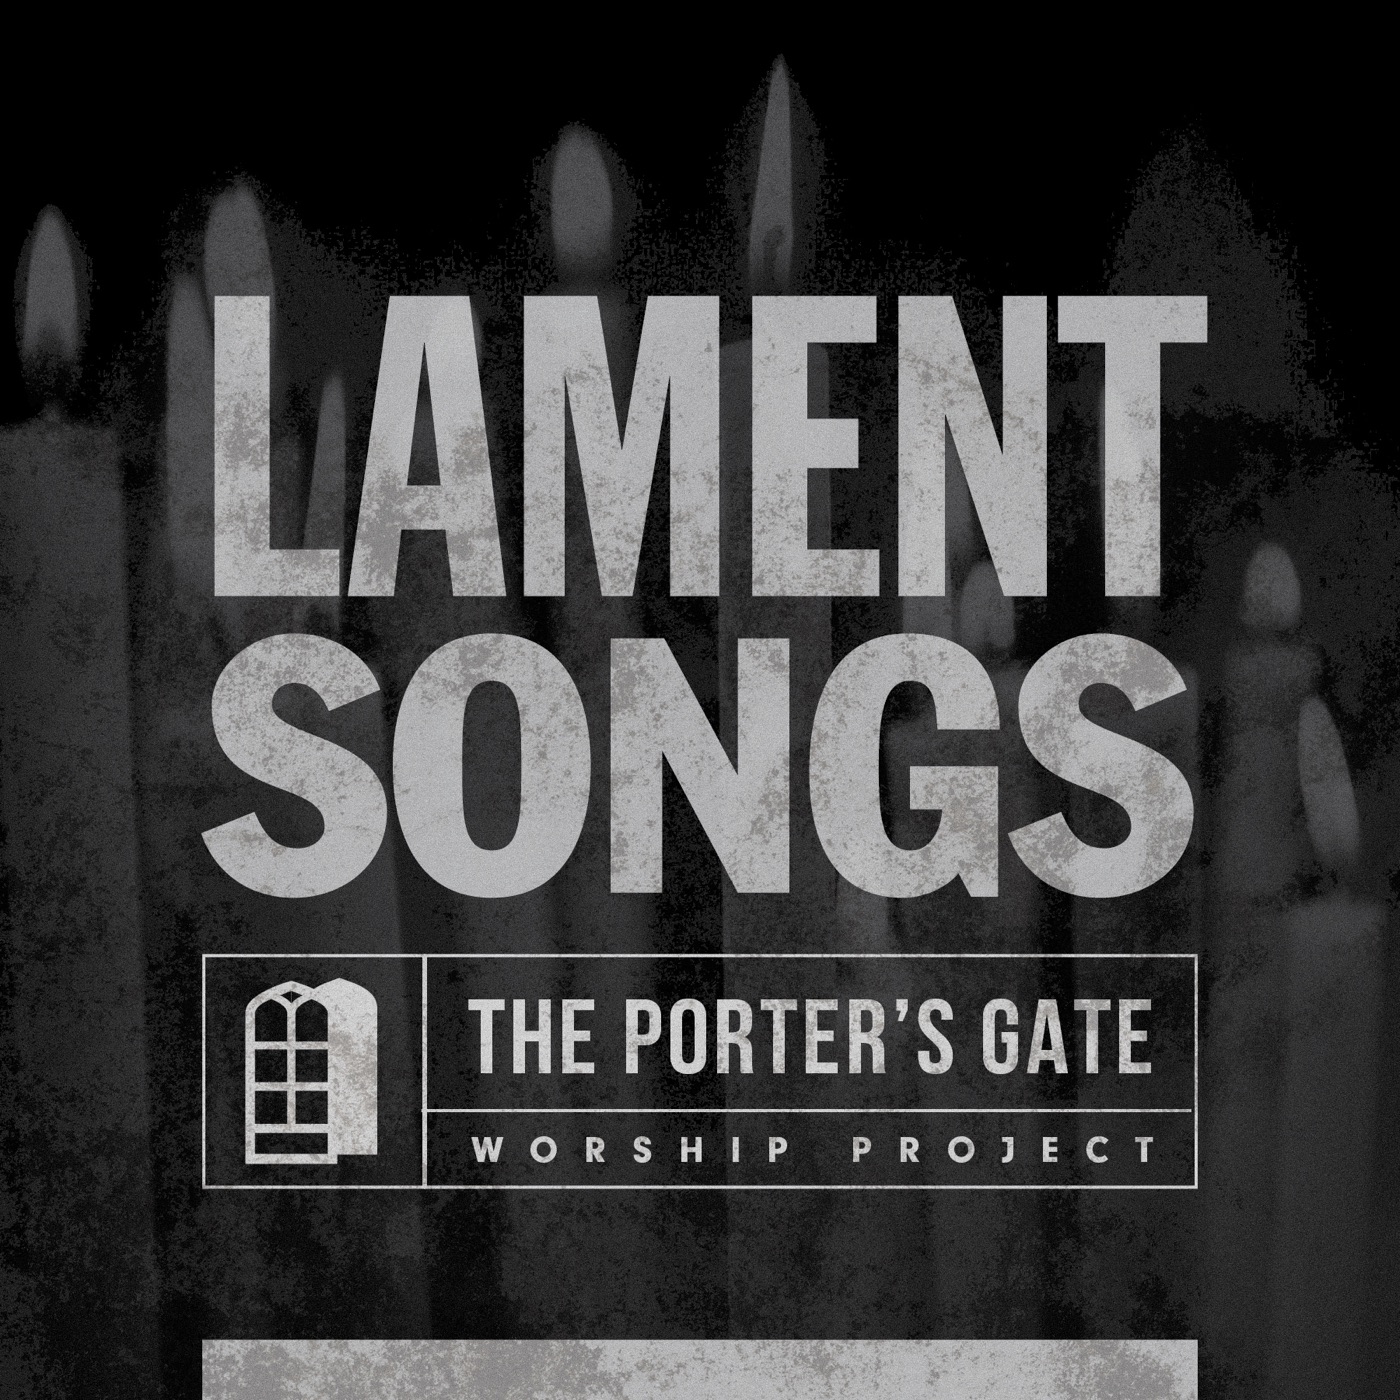 Lament Songs by The Porter's Gate